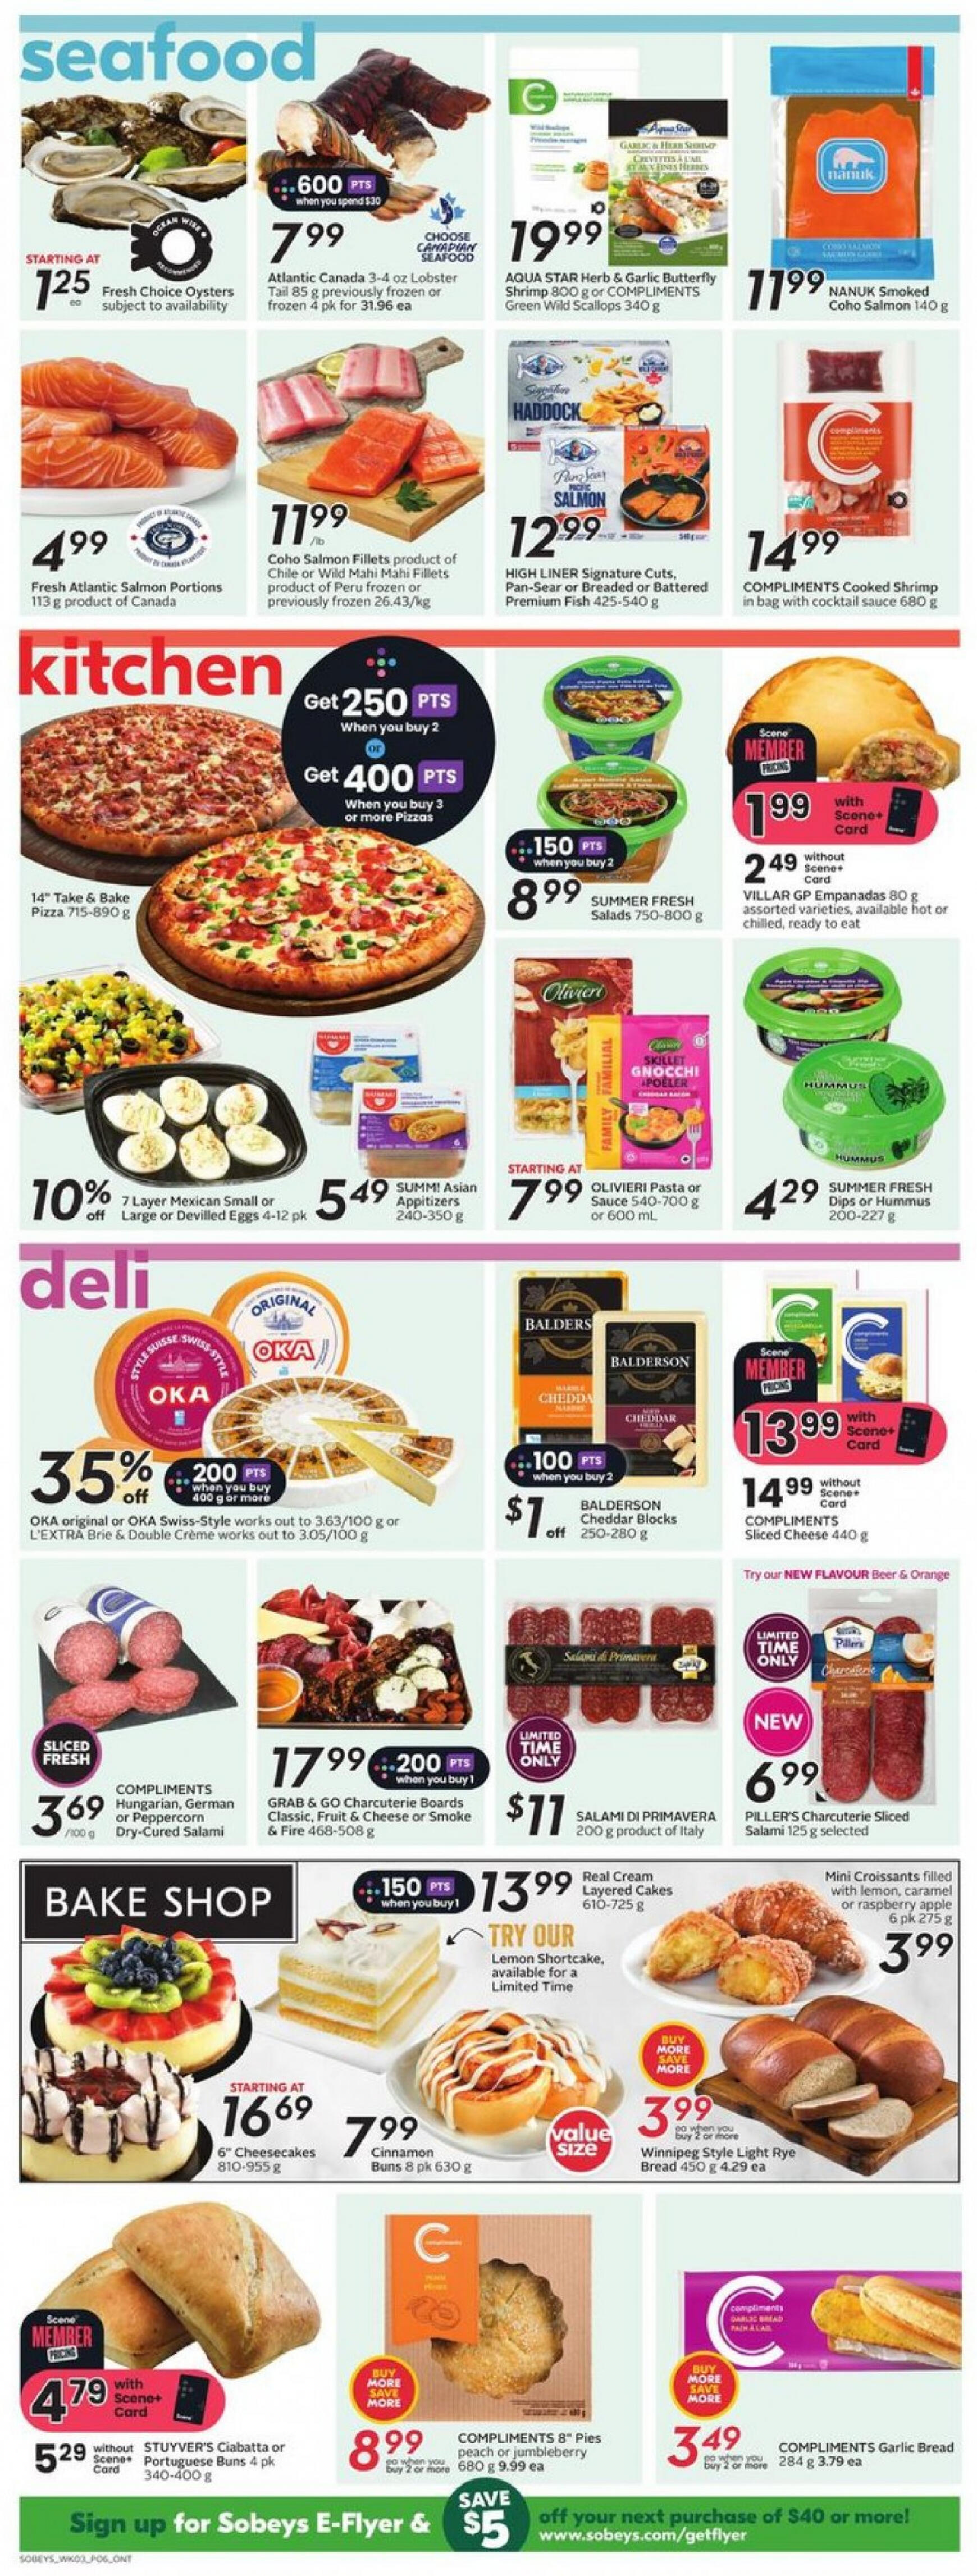 sobeys - Sobeys - Weekly Flyer - Ontario flyer current 16.05. - 22.05. - page: 11